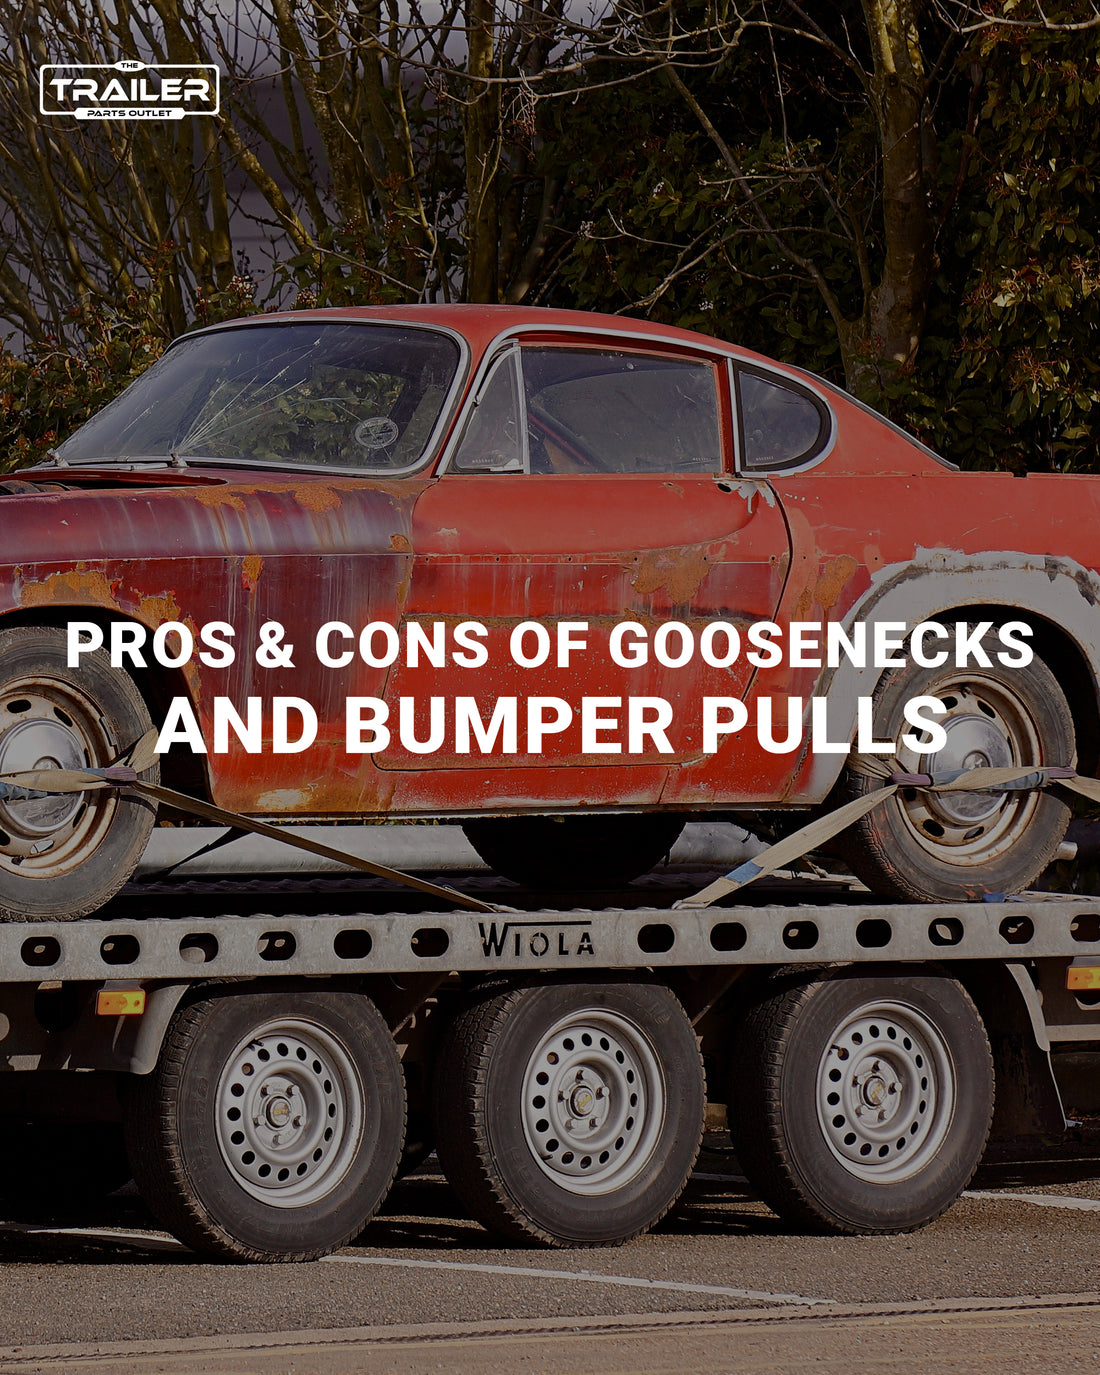 Pros and Cons of Gooseneck vs Bumper Pull Trailers